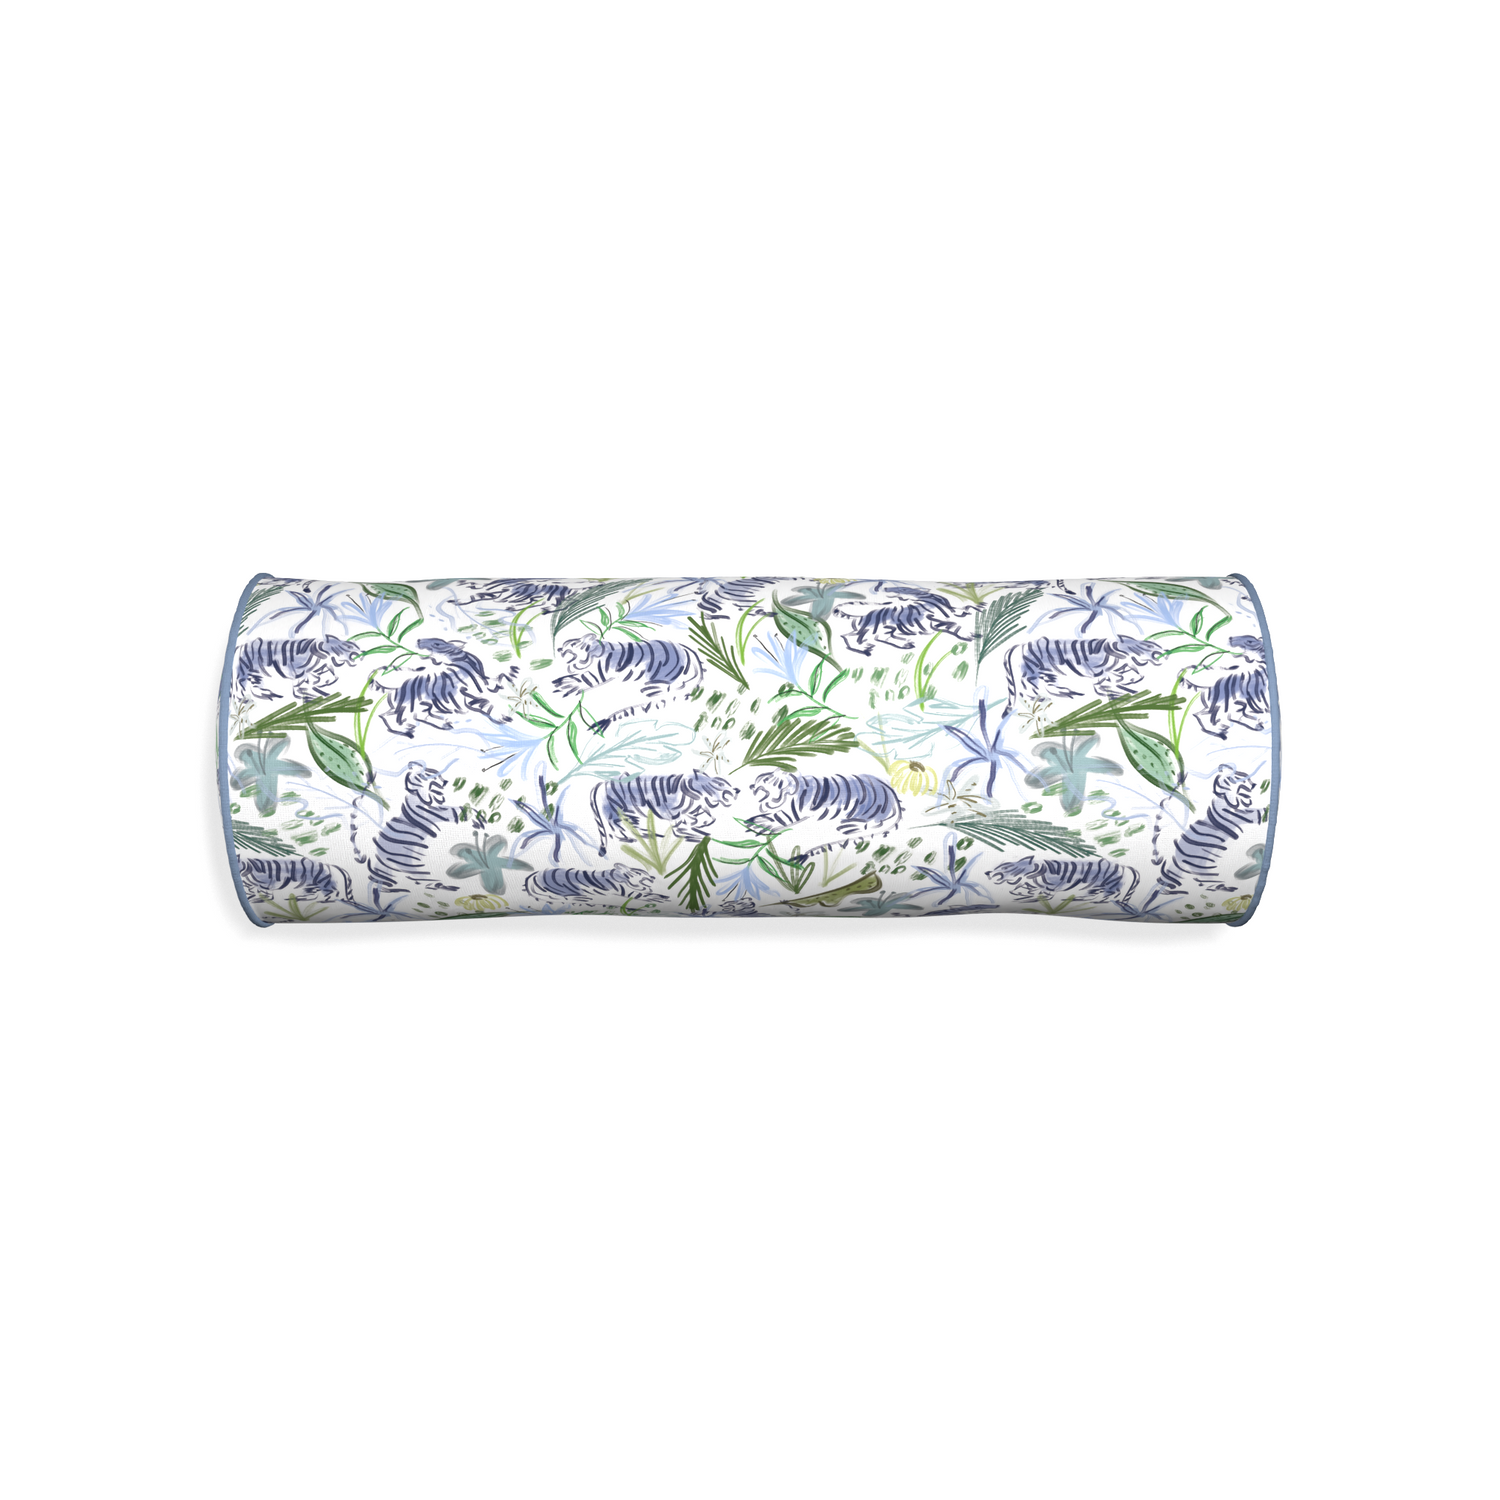 Bolster frida green custom pillow with sky piping on white background